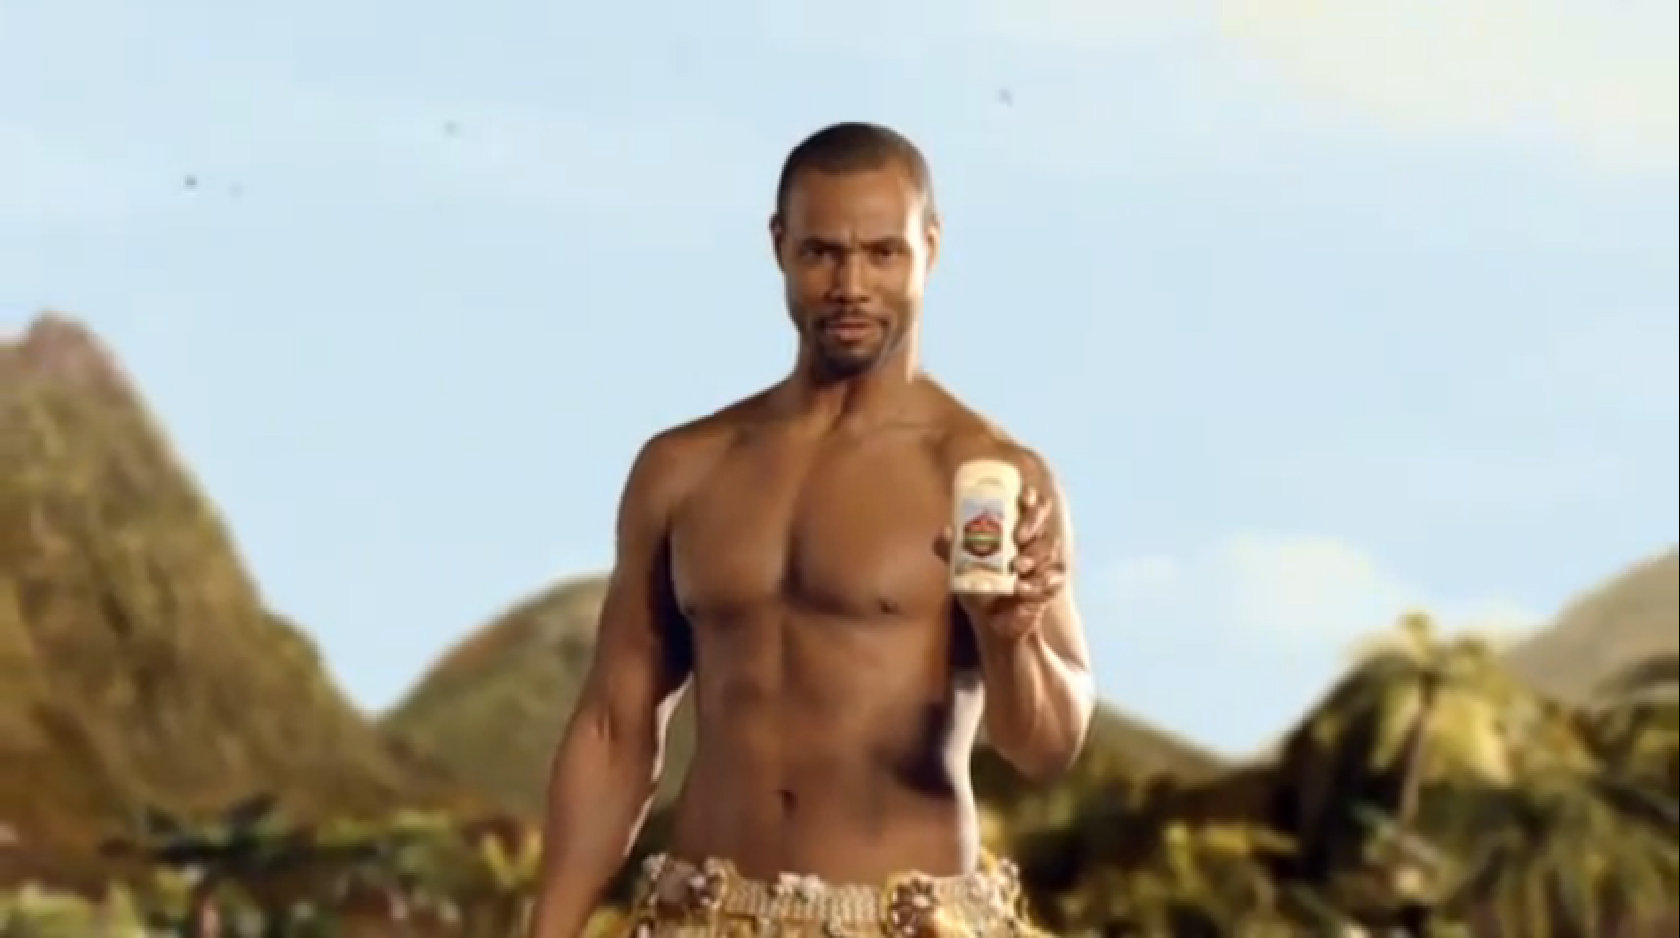 Mustafa In The Old Spice Mercial Glad To Have Been Of Service